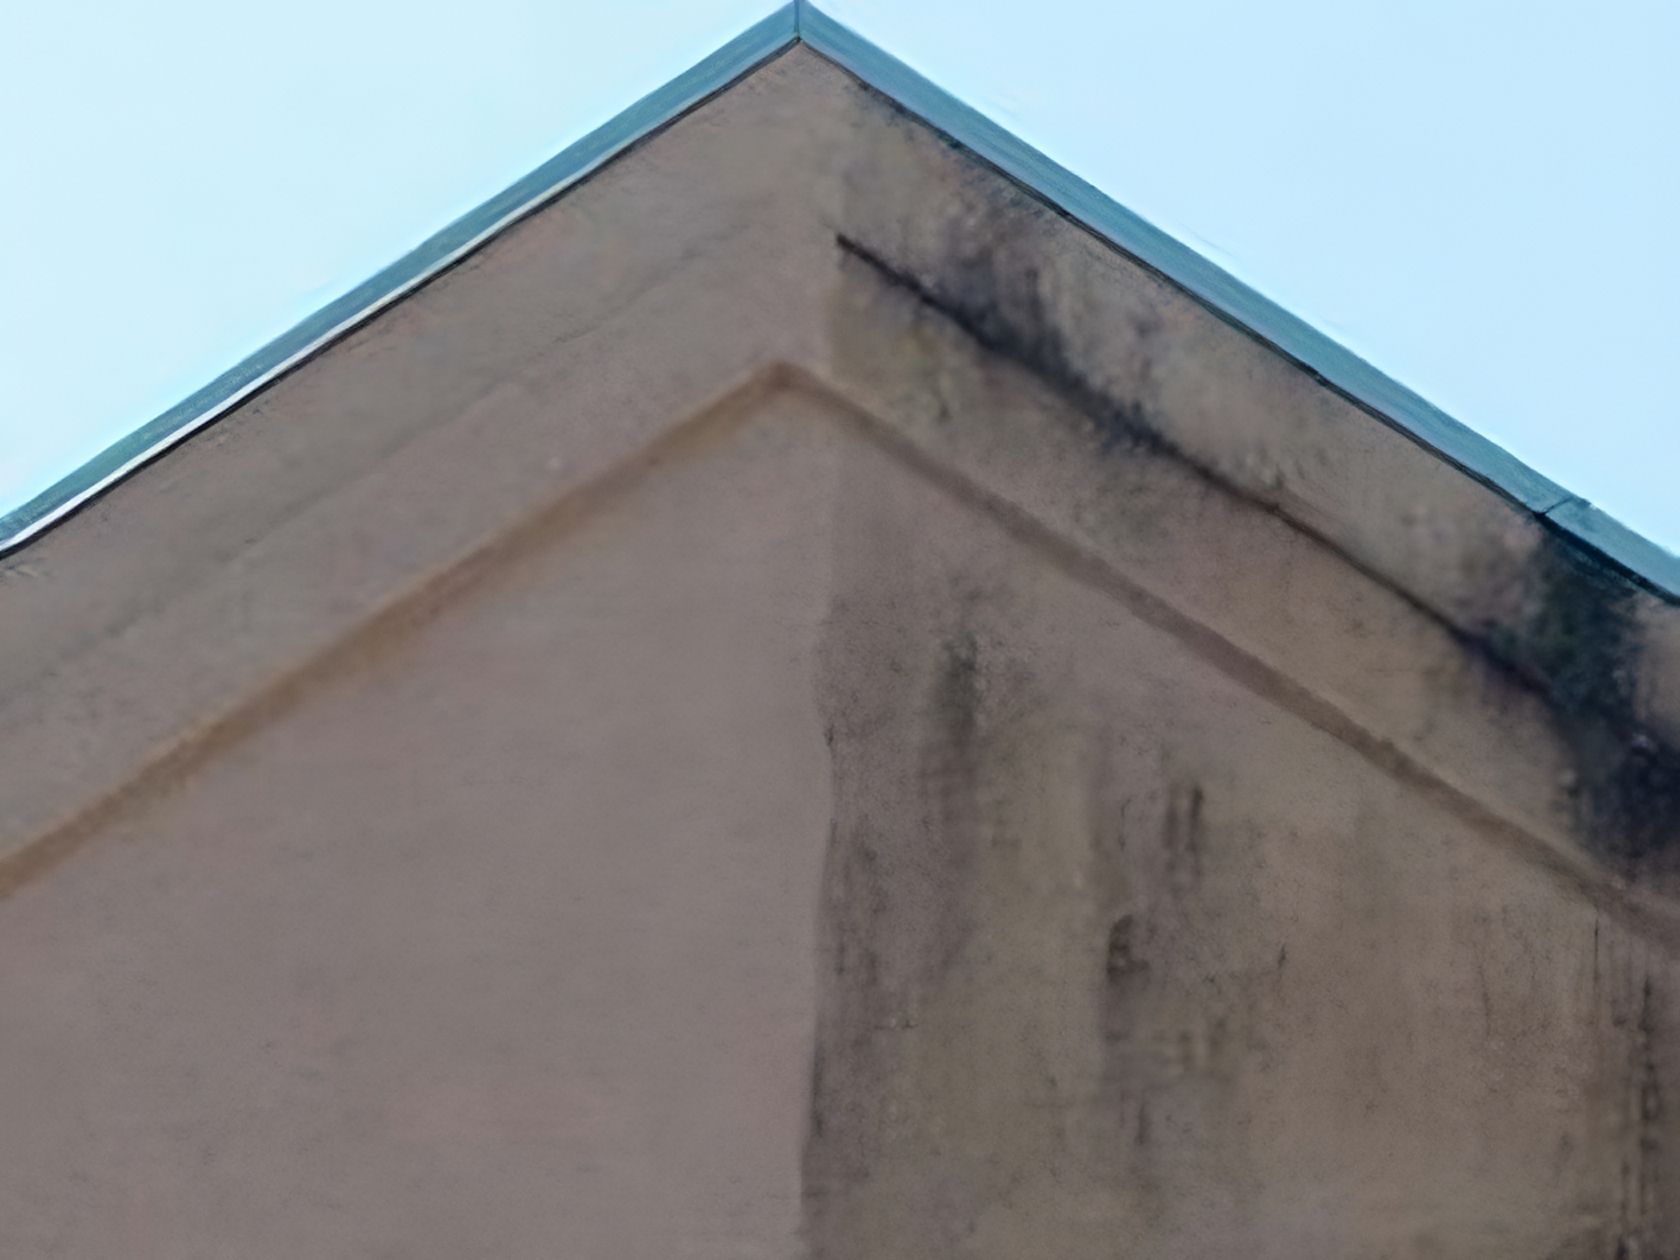 Black stains in a stucco siding